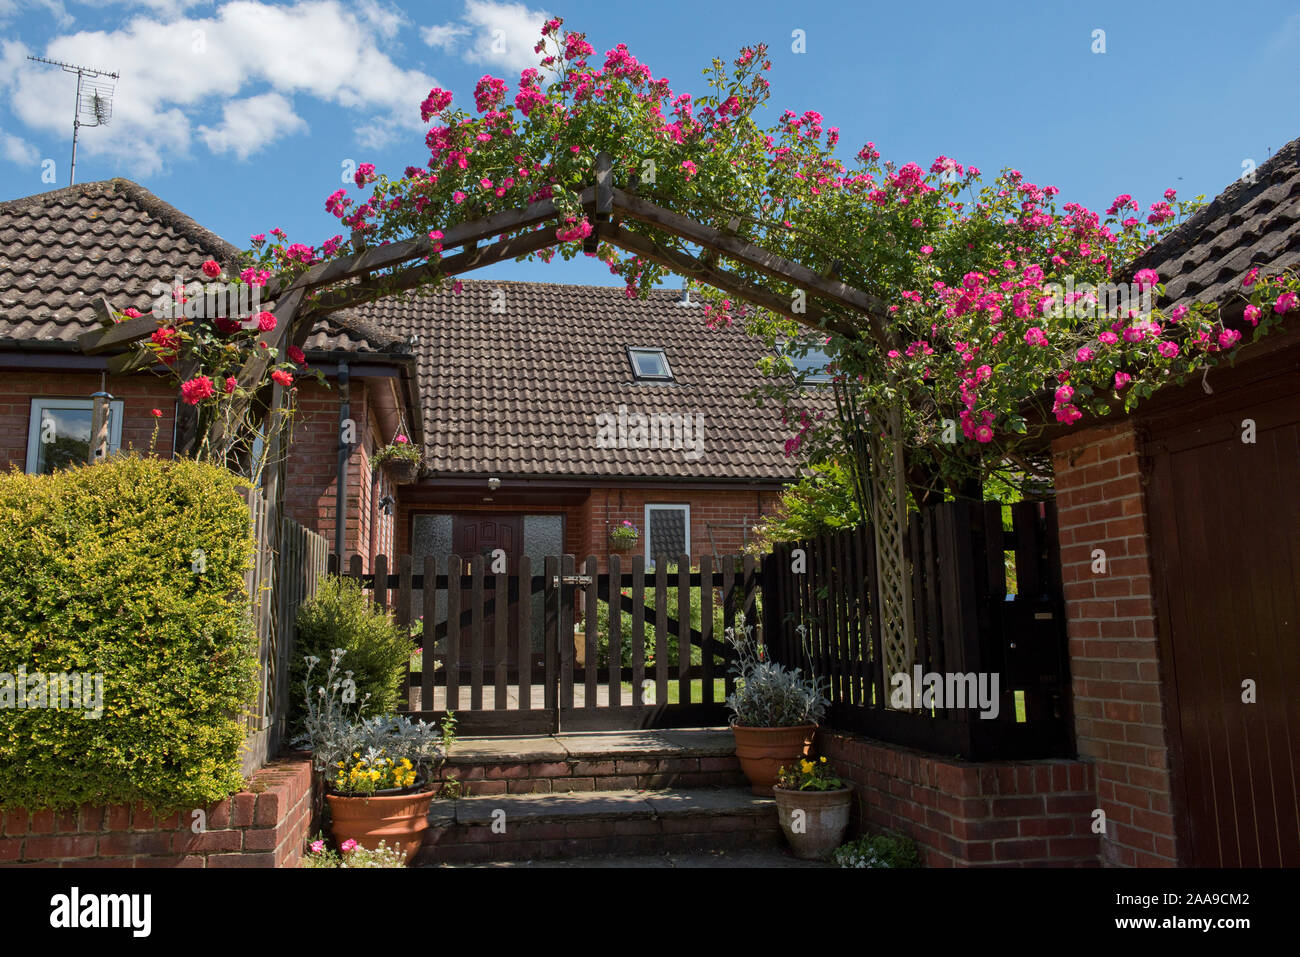 Modern bungalow with large arch over entrance gate with flowering pink magenta rose 'American Pillar' climbing across, Berkshire, June Stock Photo